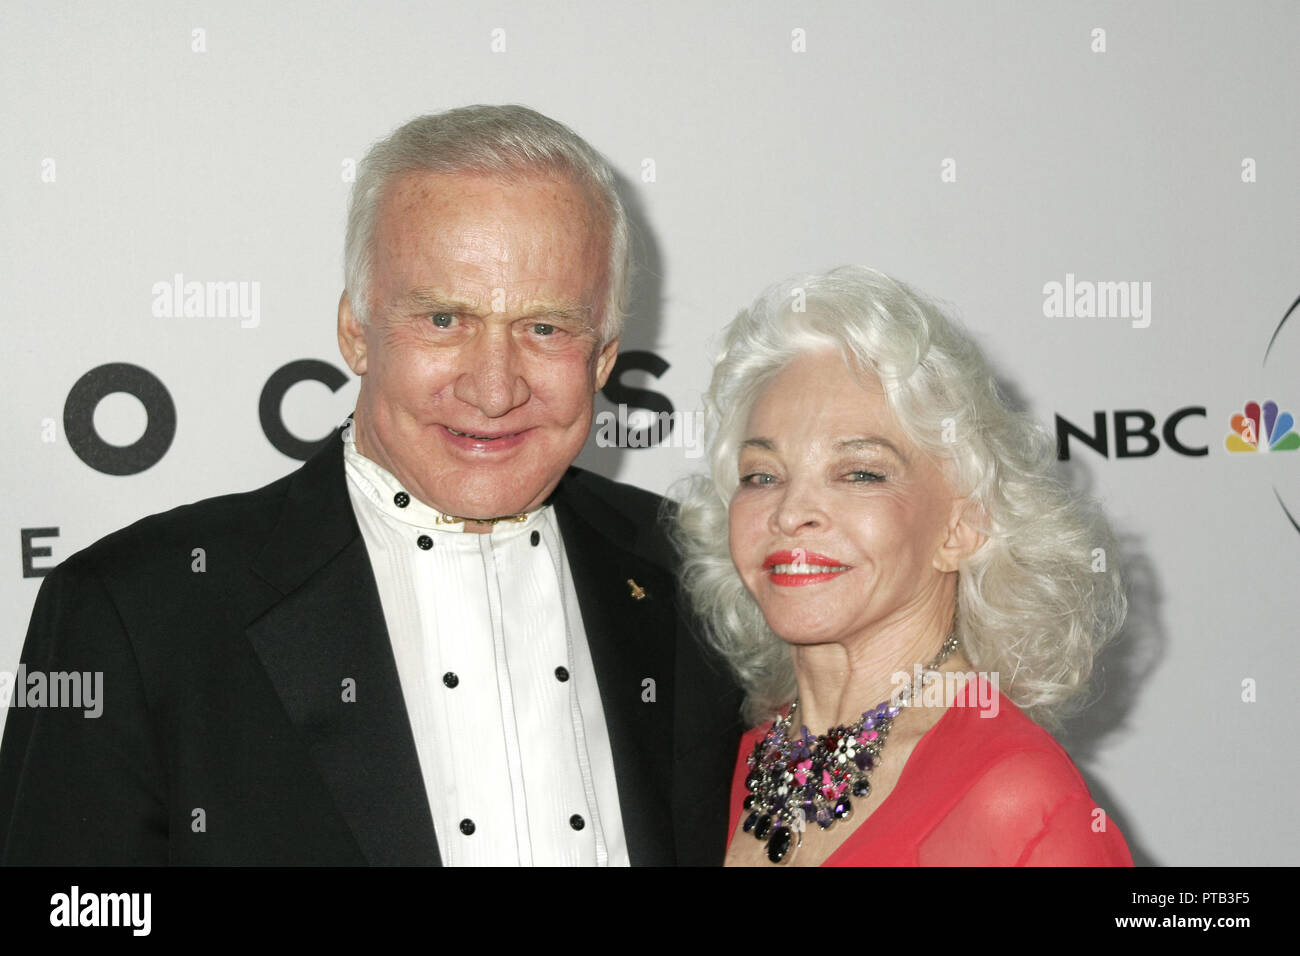 Edwin (Buzz) Eugene Aldrin Jr  01/11/09 '66th Annual Golden Globe Awards - Official NBC, Universal and Focus Features After Party'  @ Beverly Hilton Hotel, Beverly Hills Photo by Ima Kuroda/HNW / PictureLux   File Reference # 33680 199HNW Stock Photo